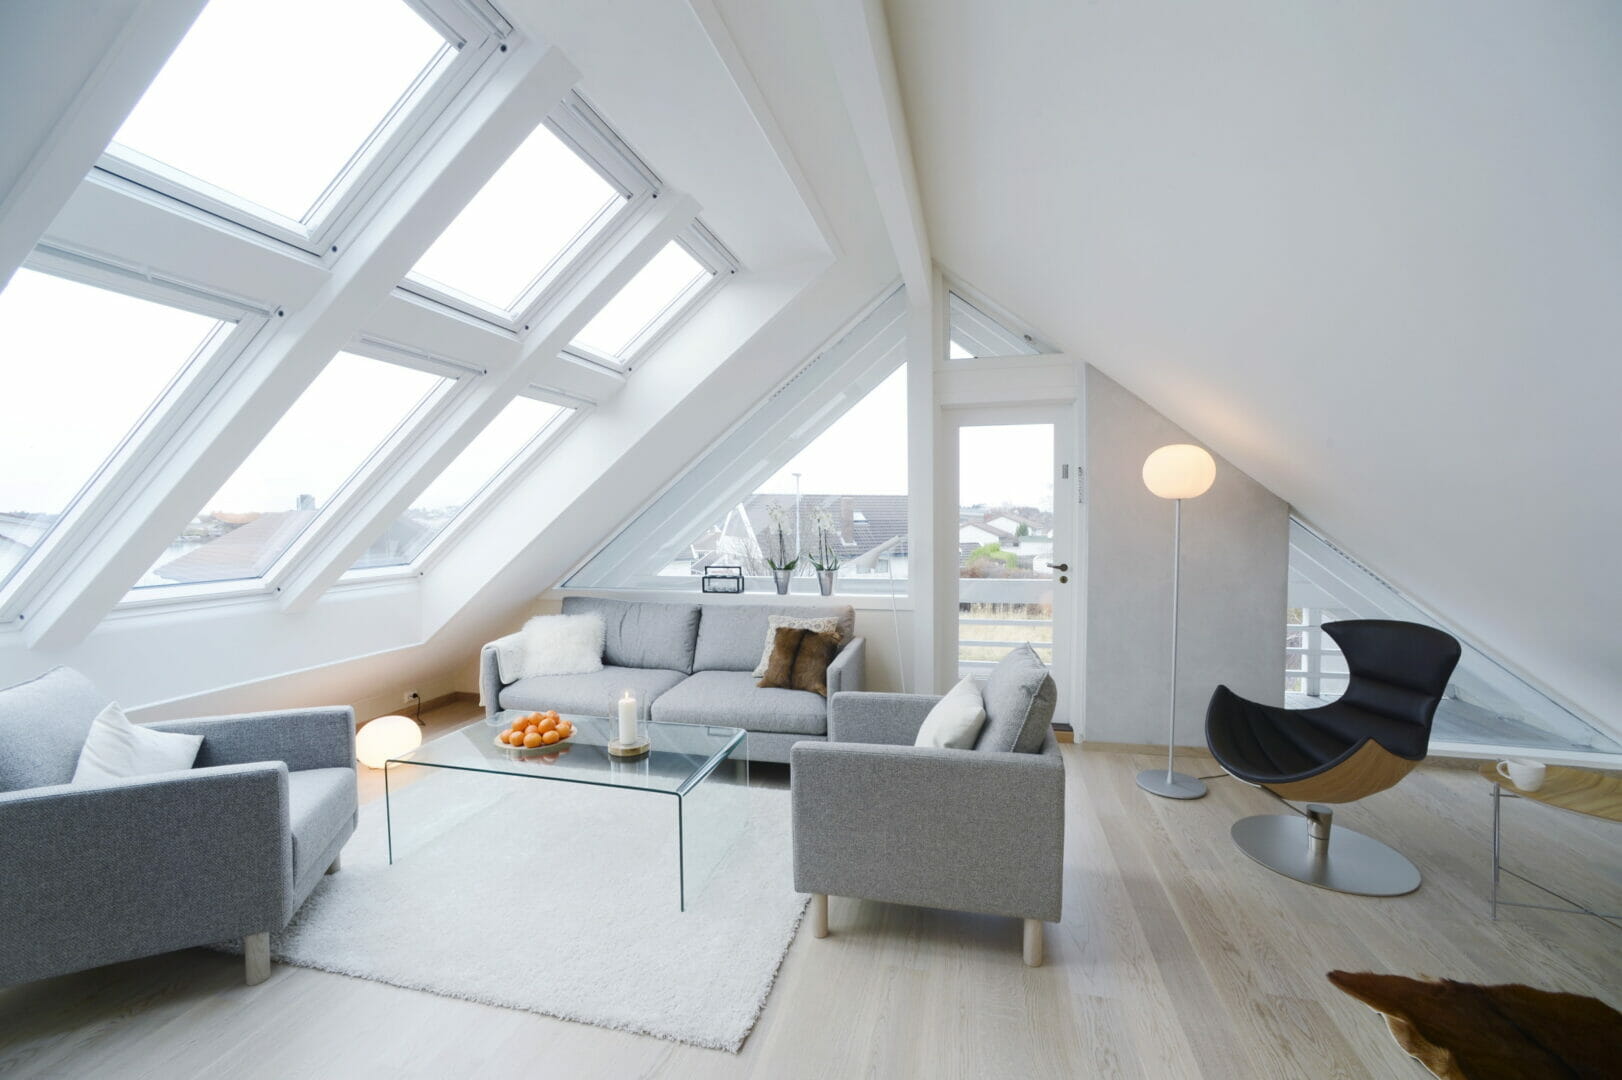 VELUX REWARDS SCHEME OFFERS UP TO £35 FOR PURCHASES THIS SPRING @VELUXGBI